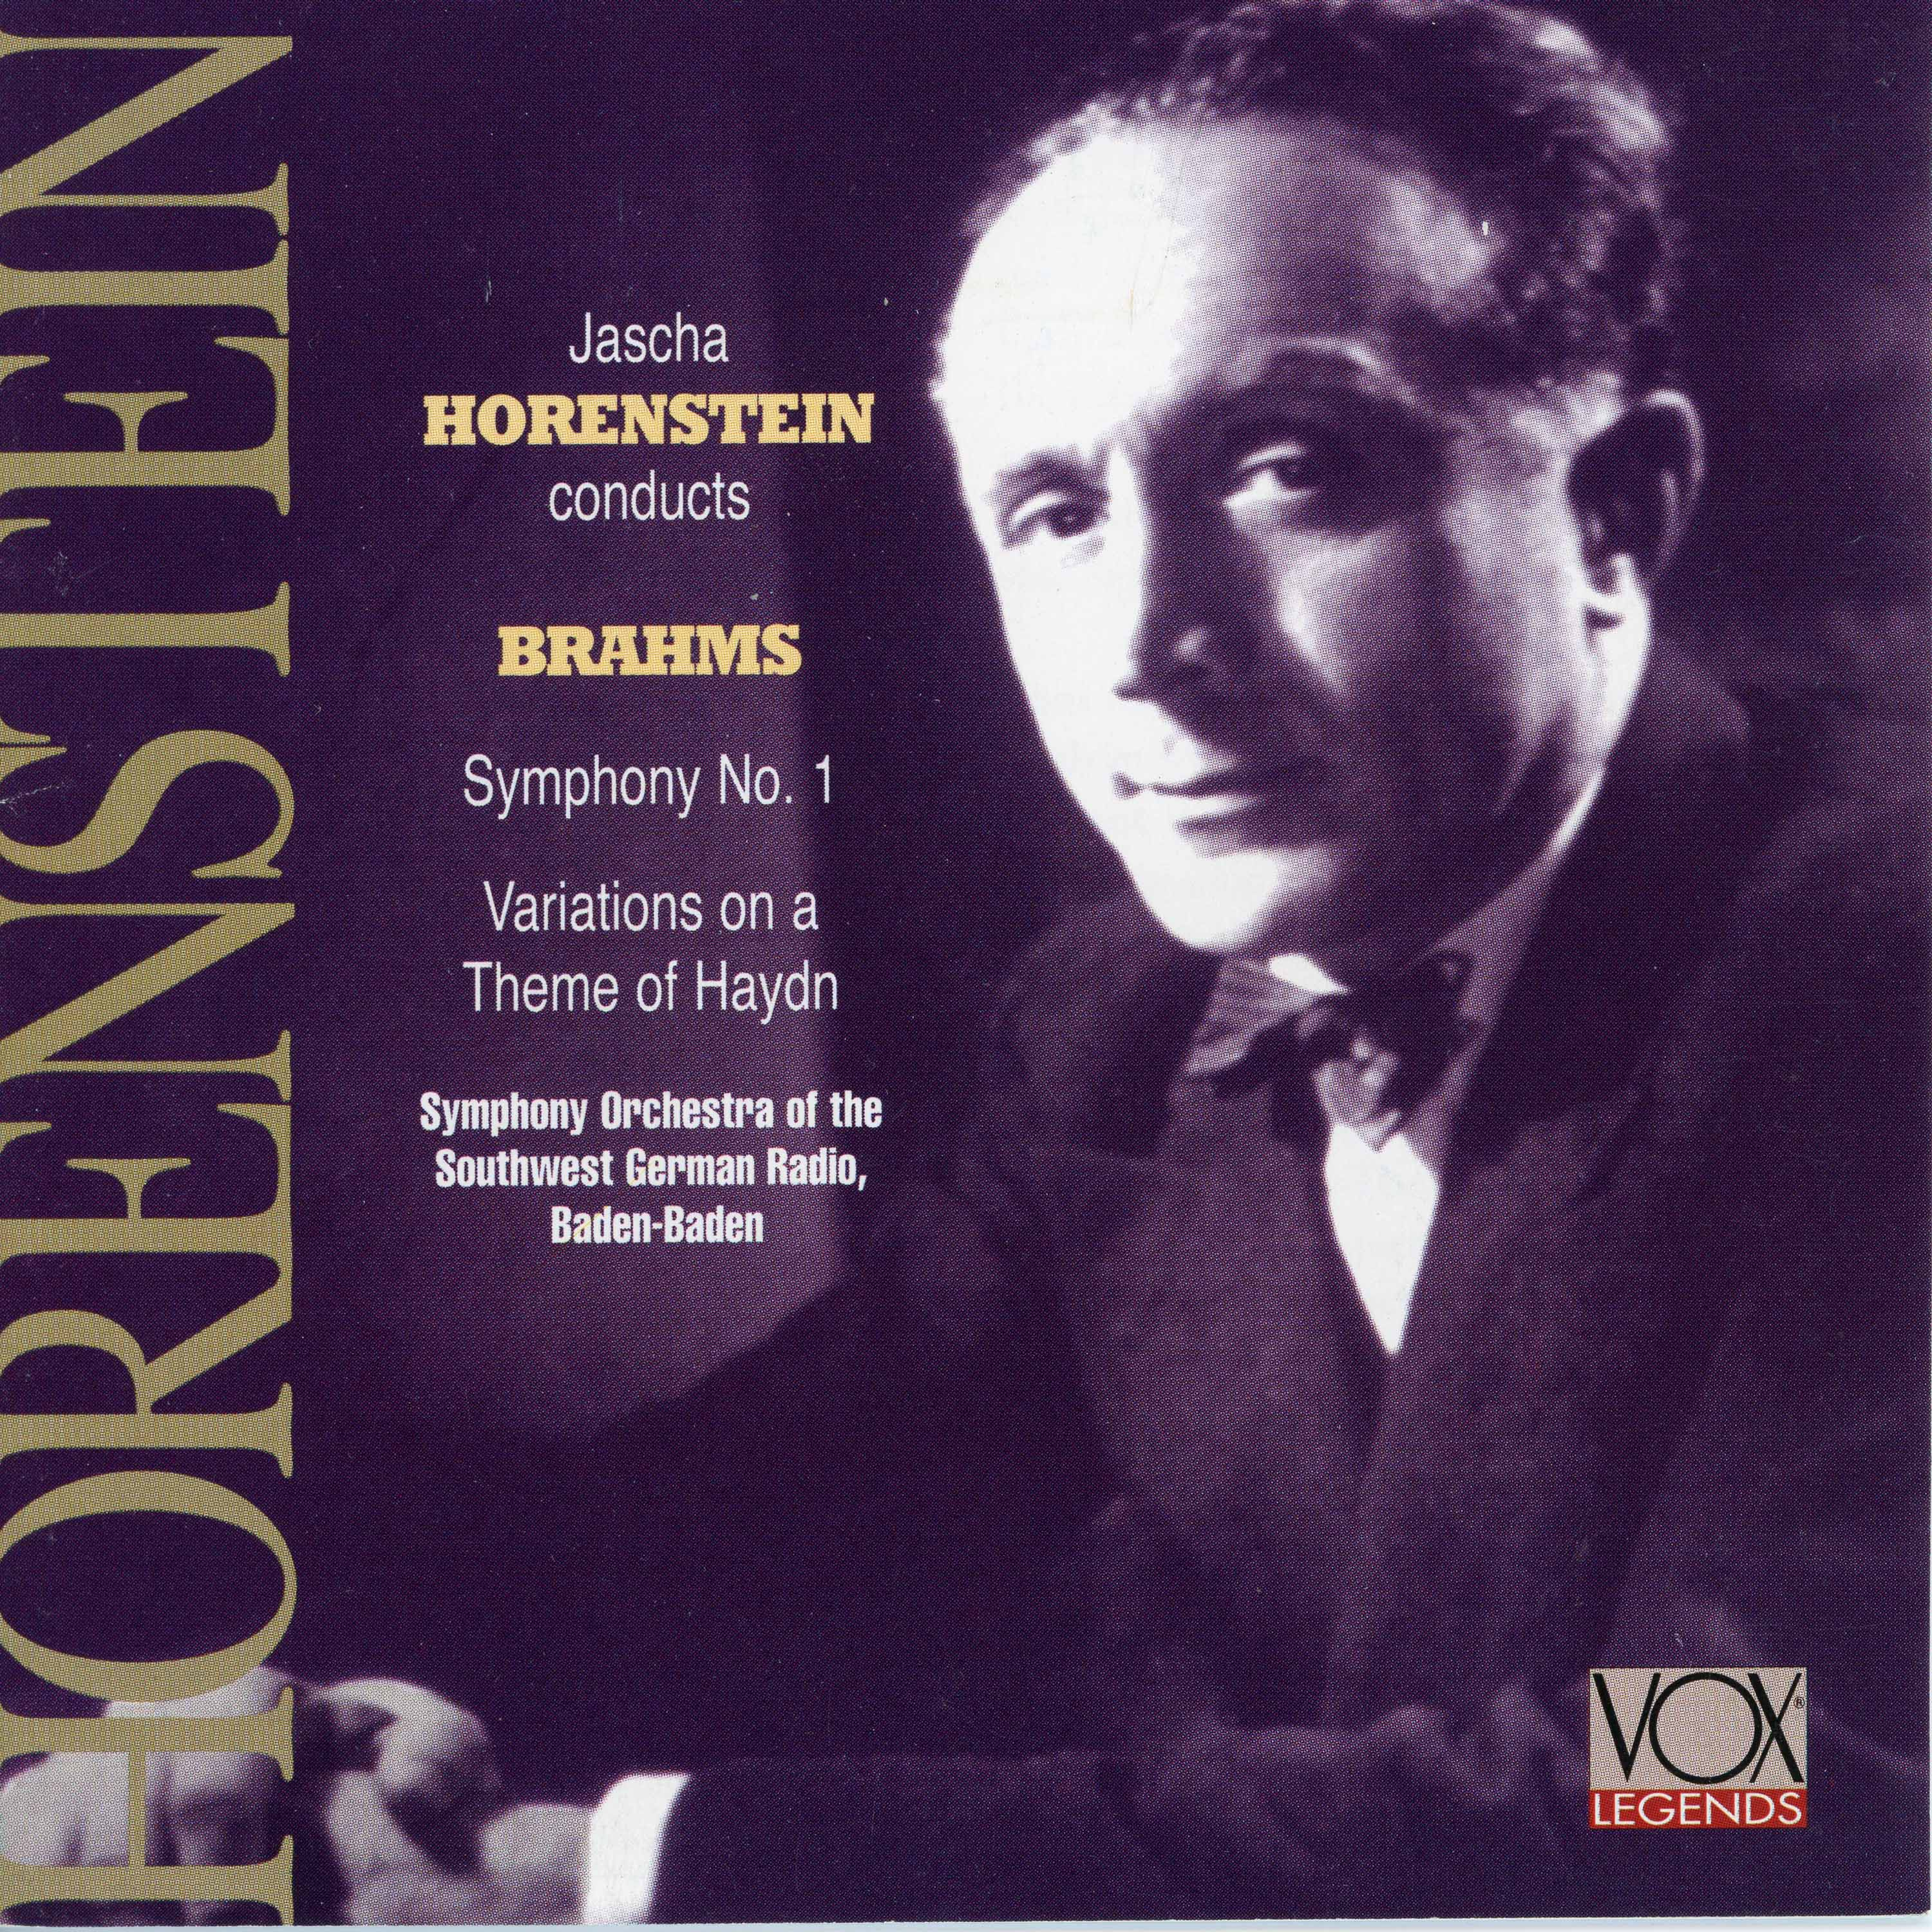 Variations on a Theme by Haydn, Op. 56a "St. Anthony Variations":Variations on a Theme by Haydn, Op. 56a "St. Anthony Variations": Thema. Andante